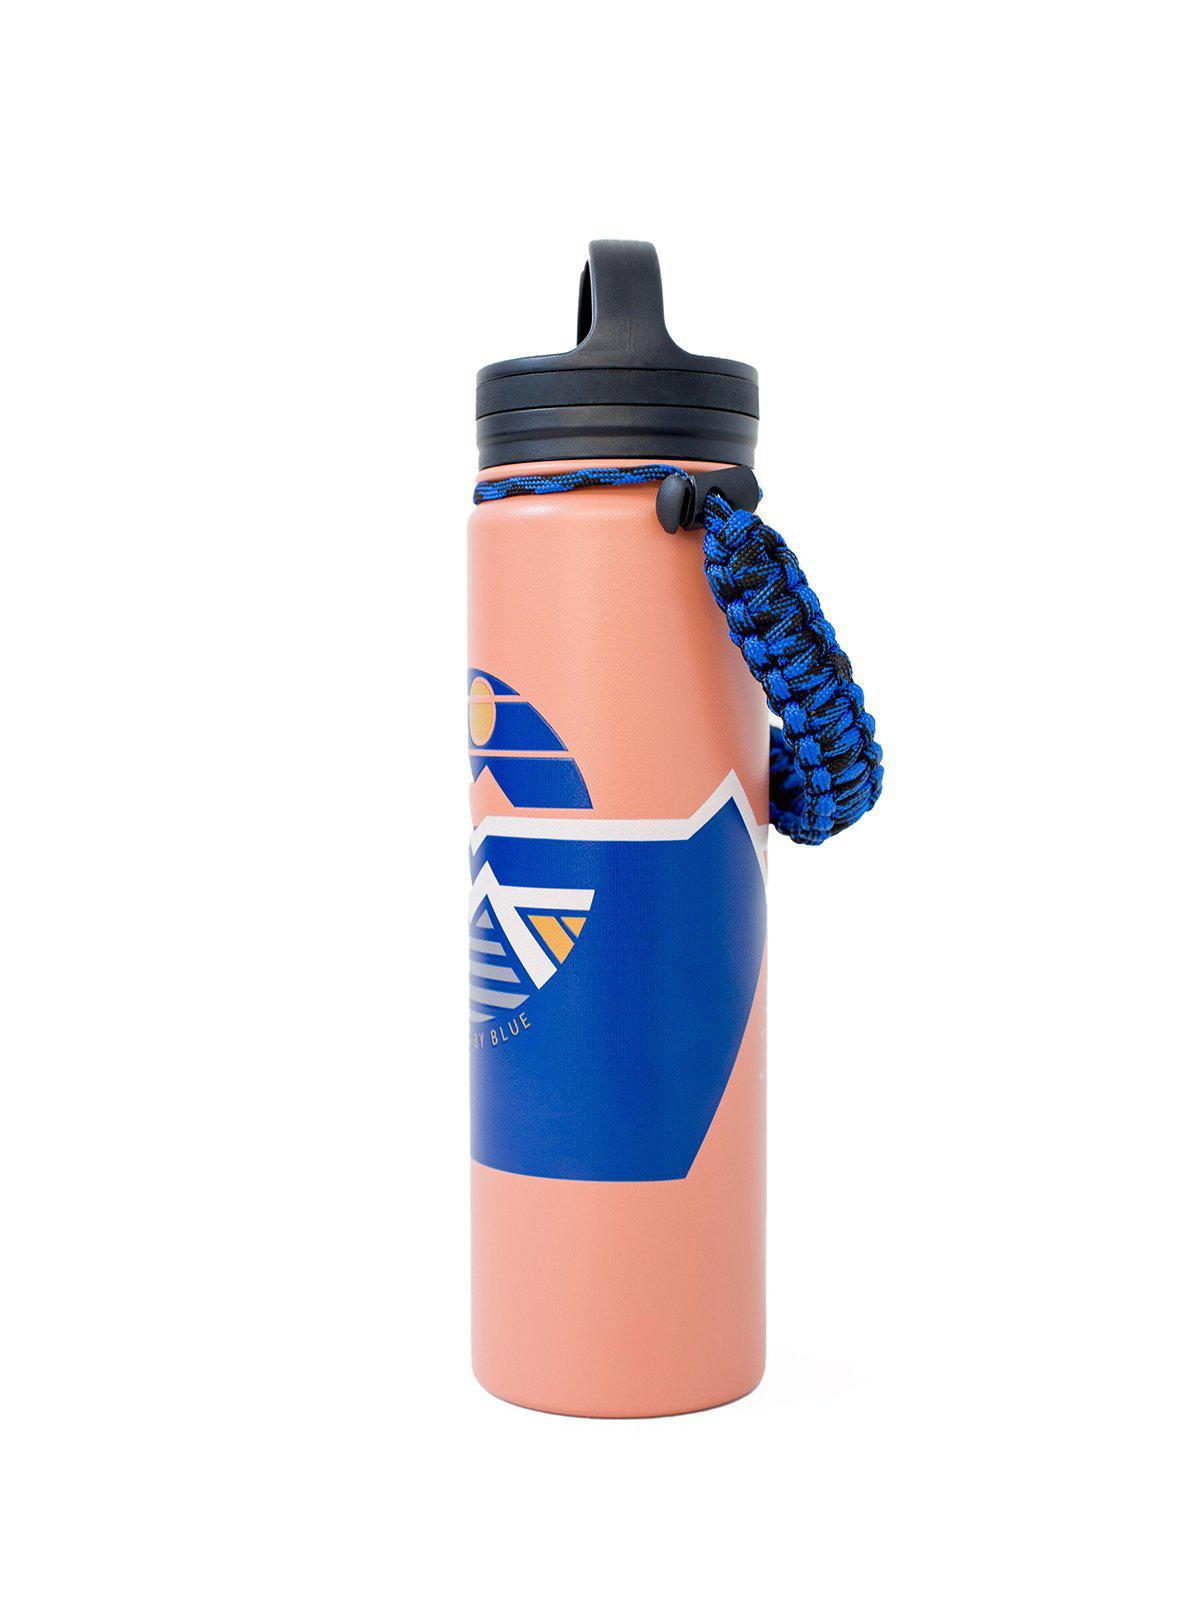 United by Blue 22oz Geo Mountain 22oz Insulated Steel Water Bottle Orange - MORE by Morello Indonesia